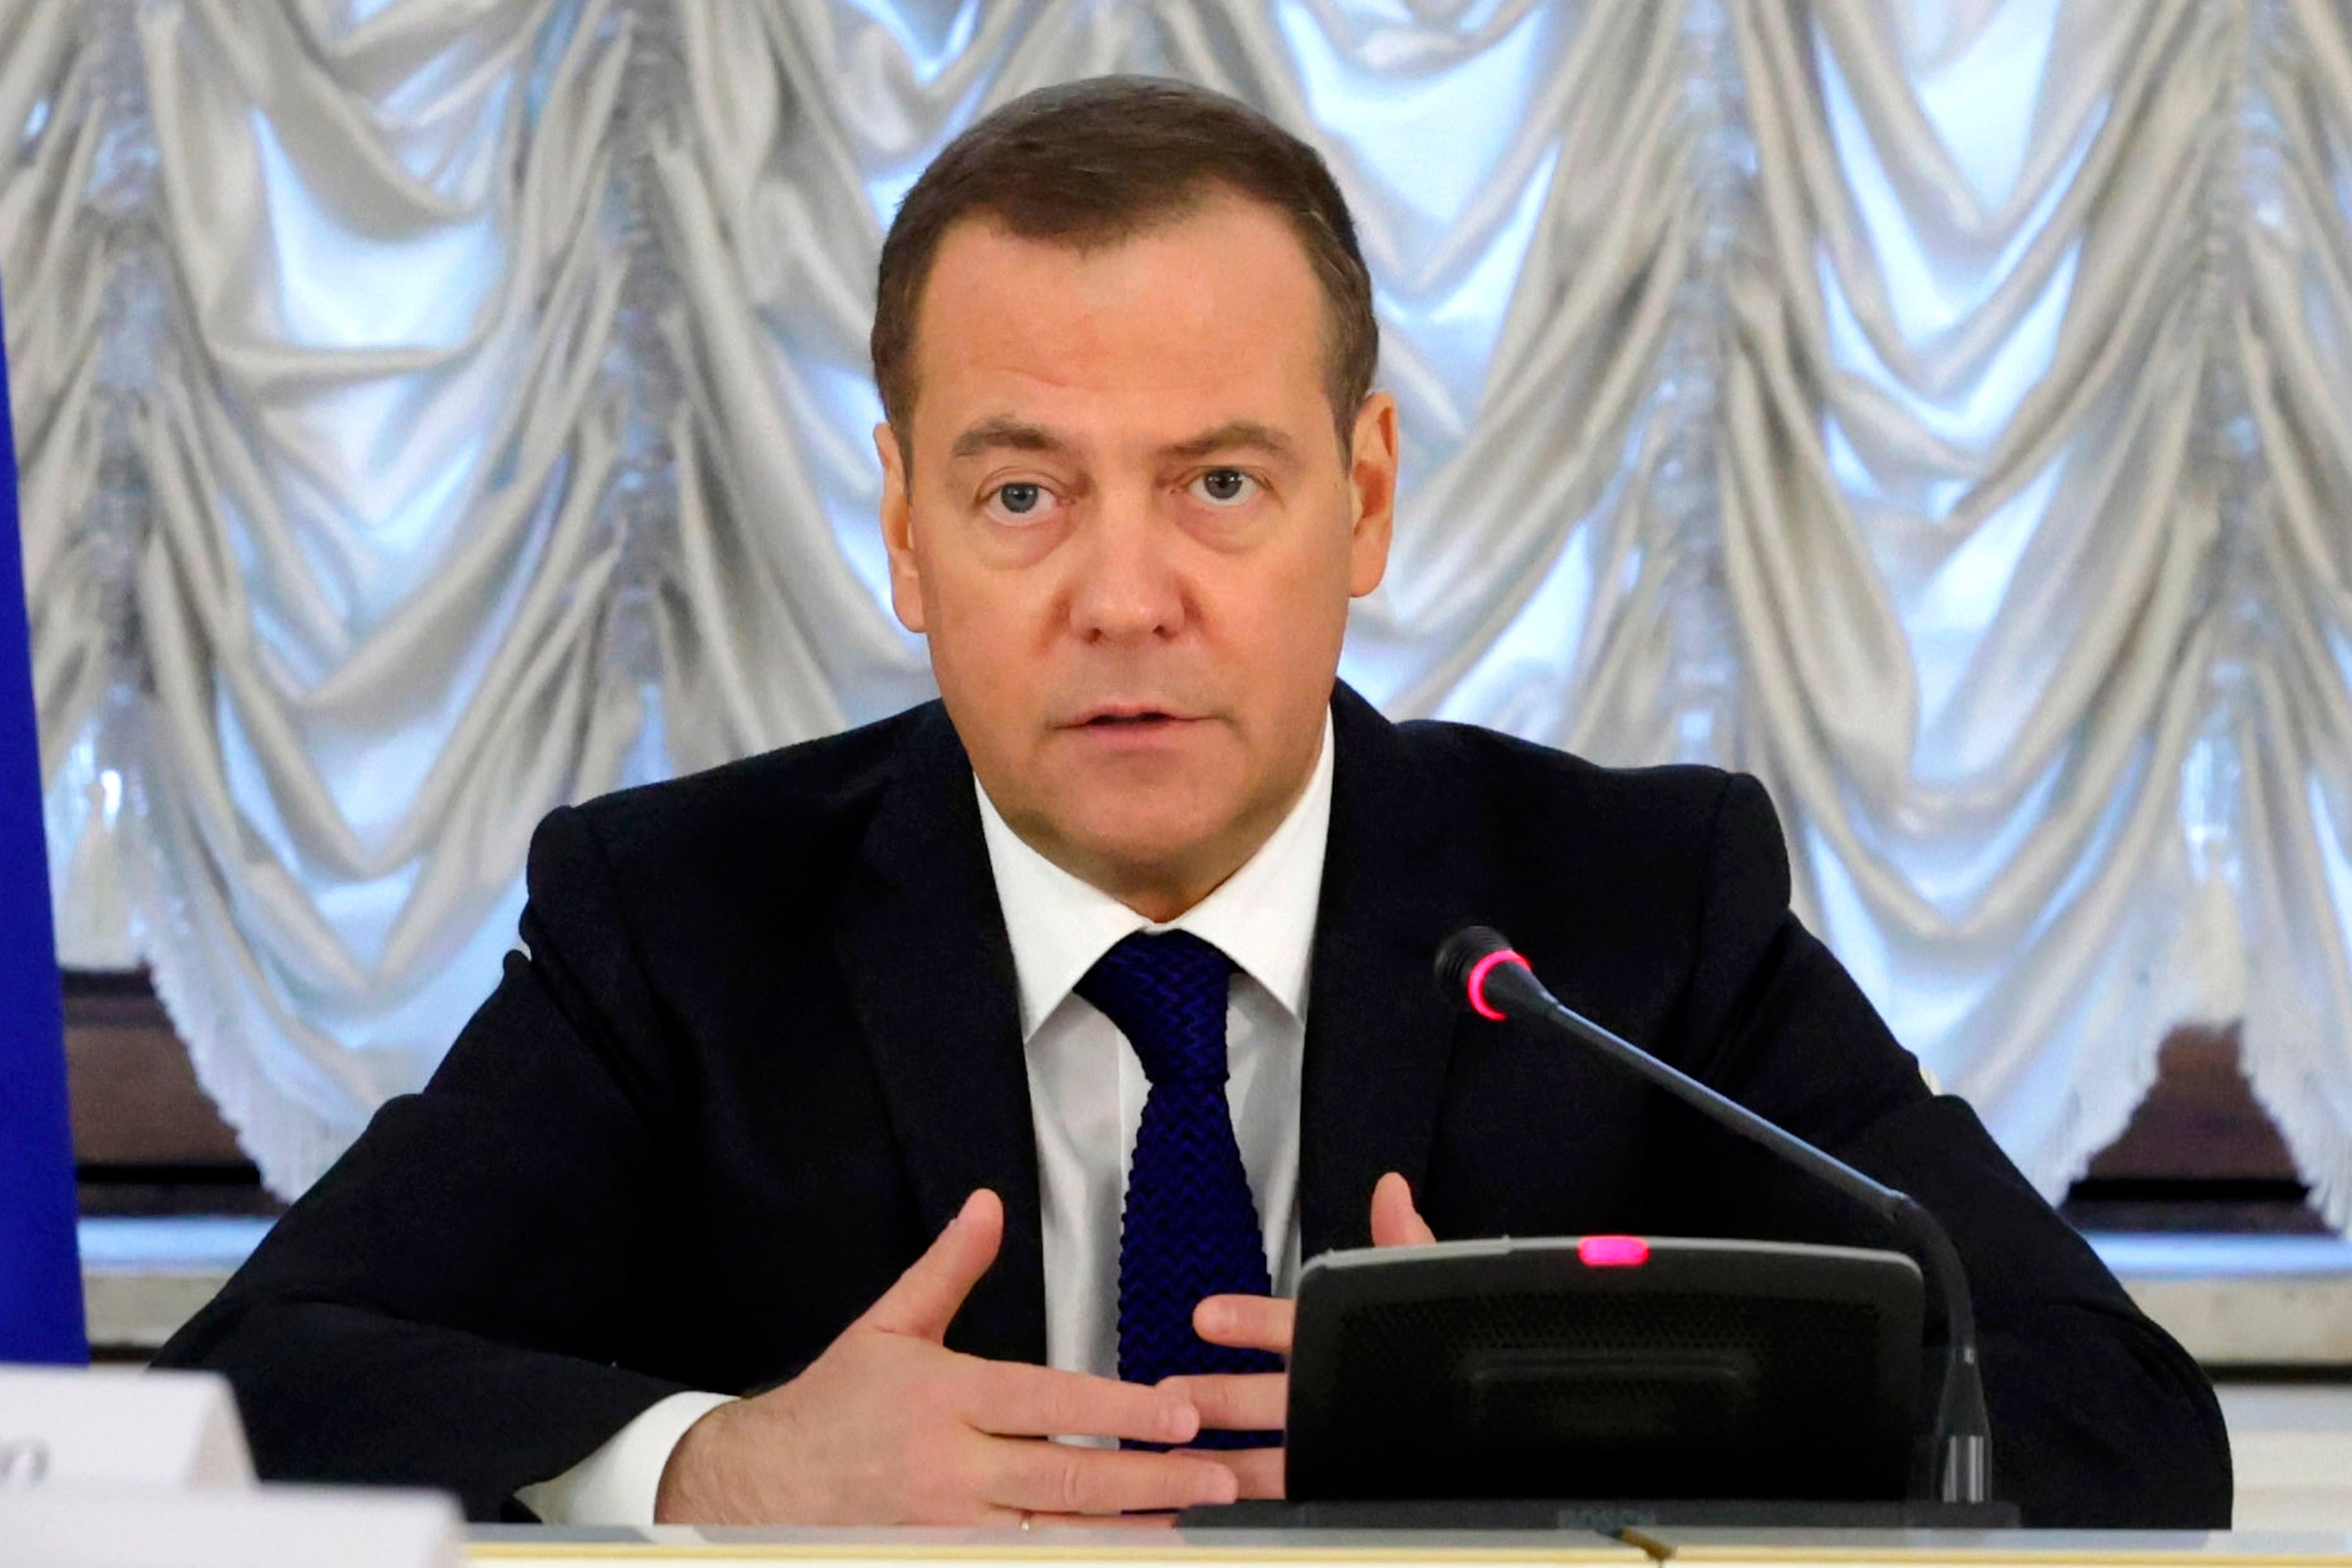 Dmitry Medvedev, Deputy Chairman of the Russian Security Council, and a former President of Russia